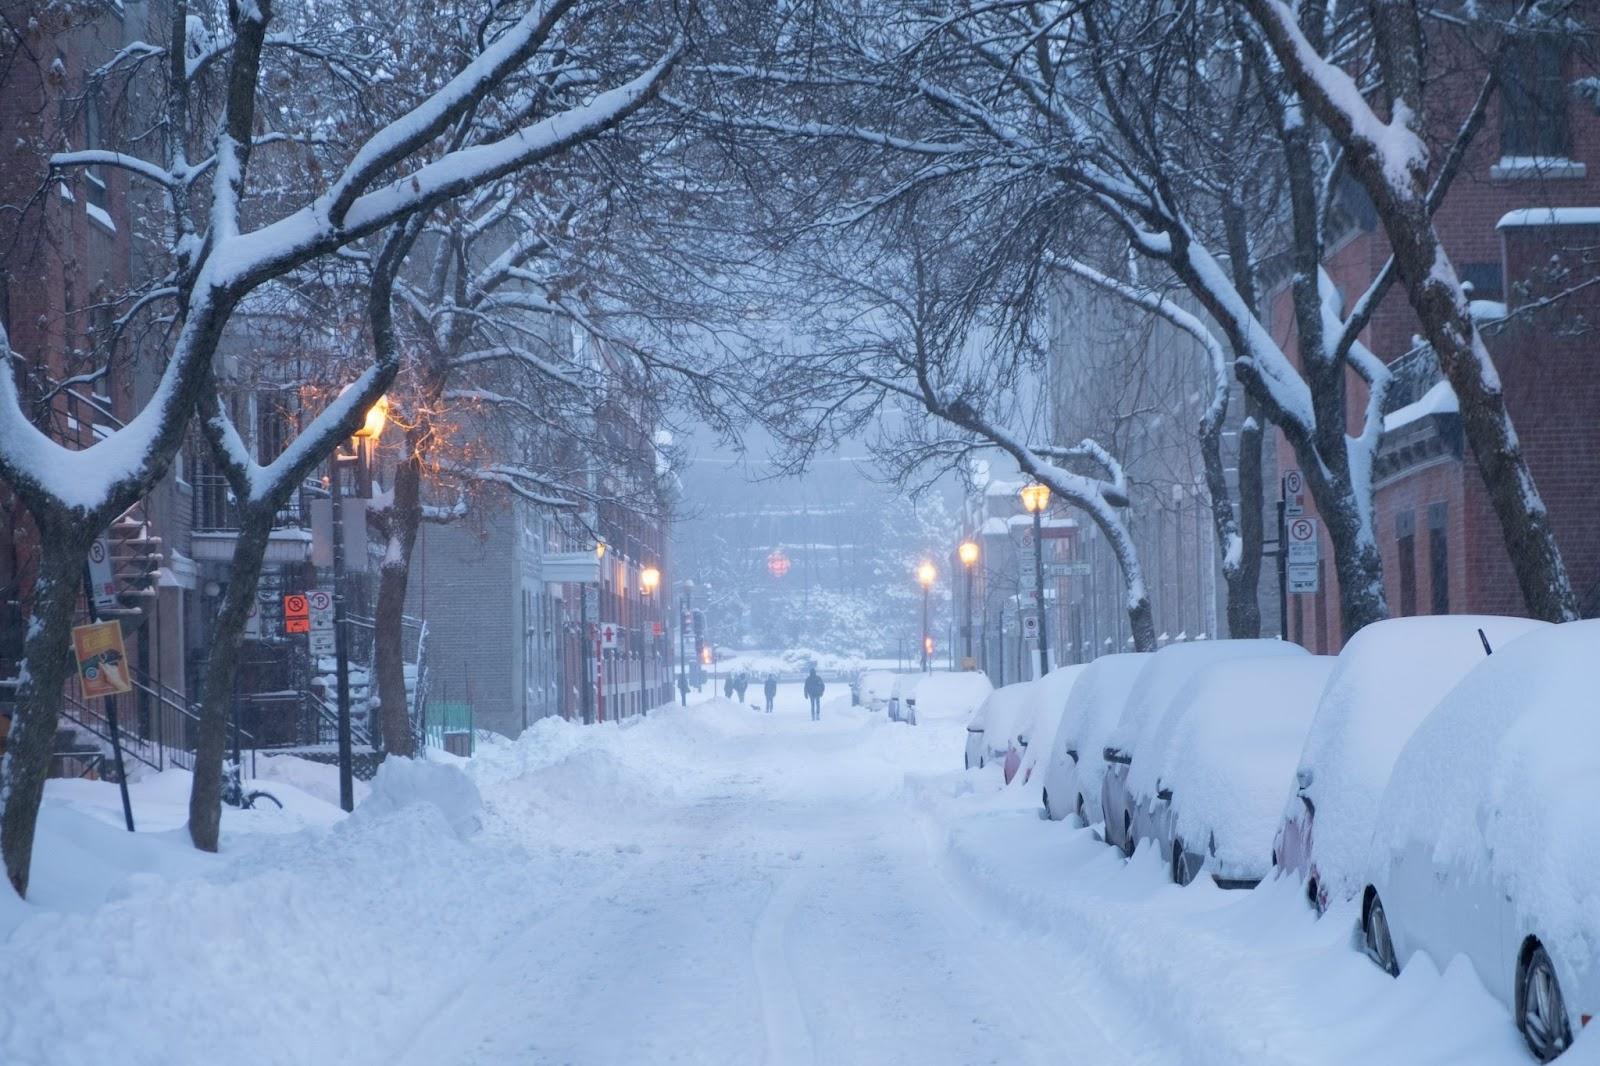 View down a street in Montreal, Canada in Winter - deep snowfall 